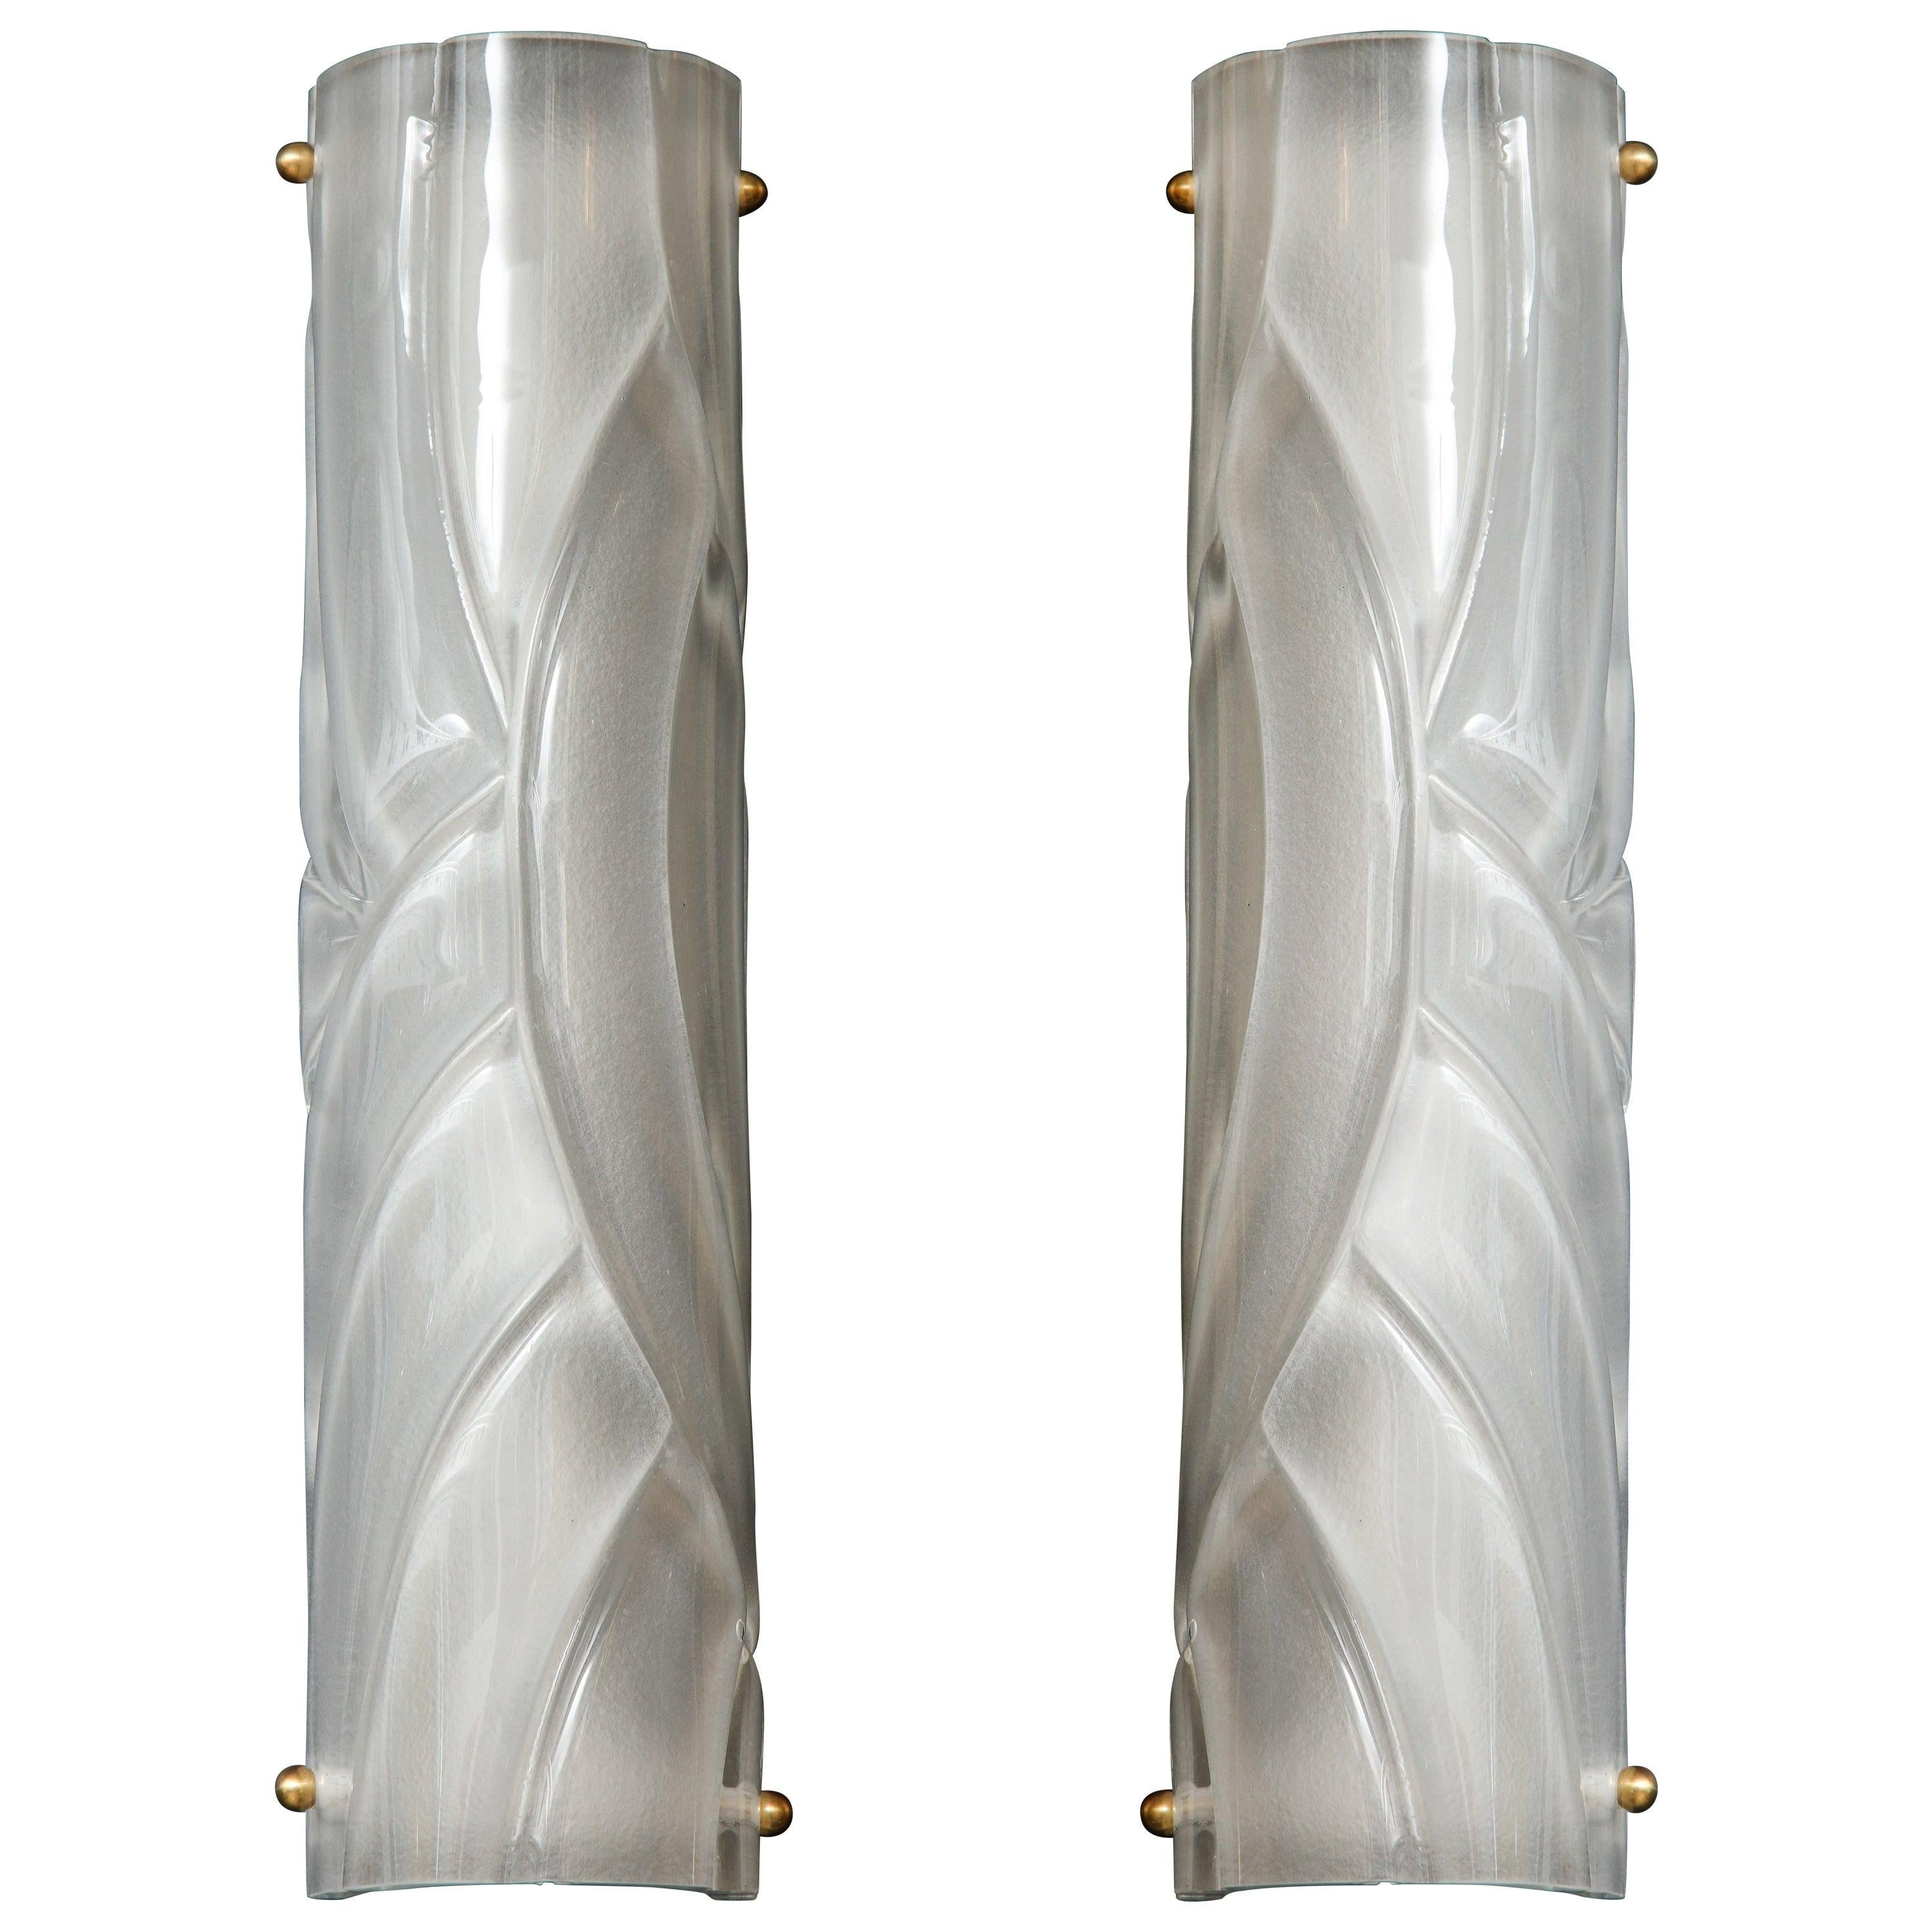 Contemporary Slender Pair of Translucent White Textured Murano Glass and Brass Sconces, Italy